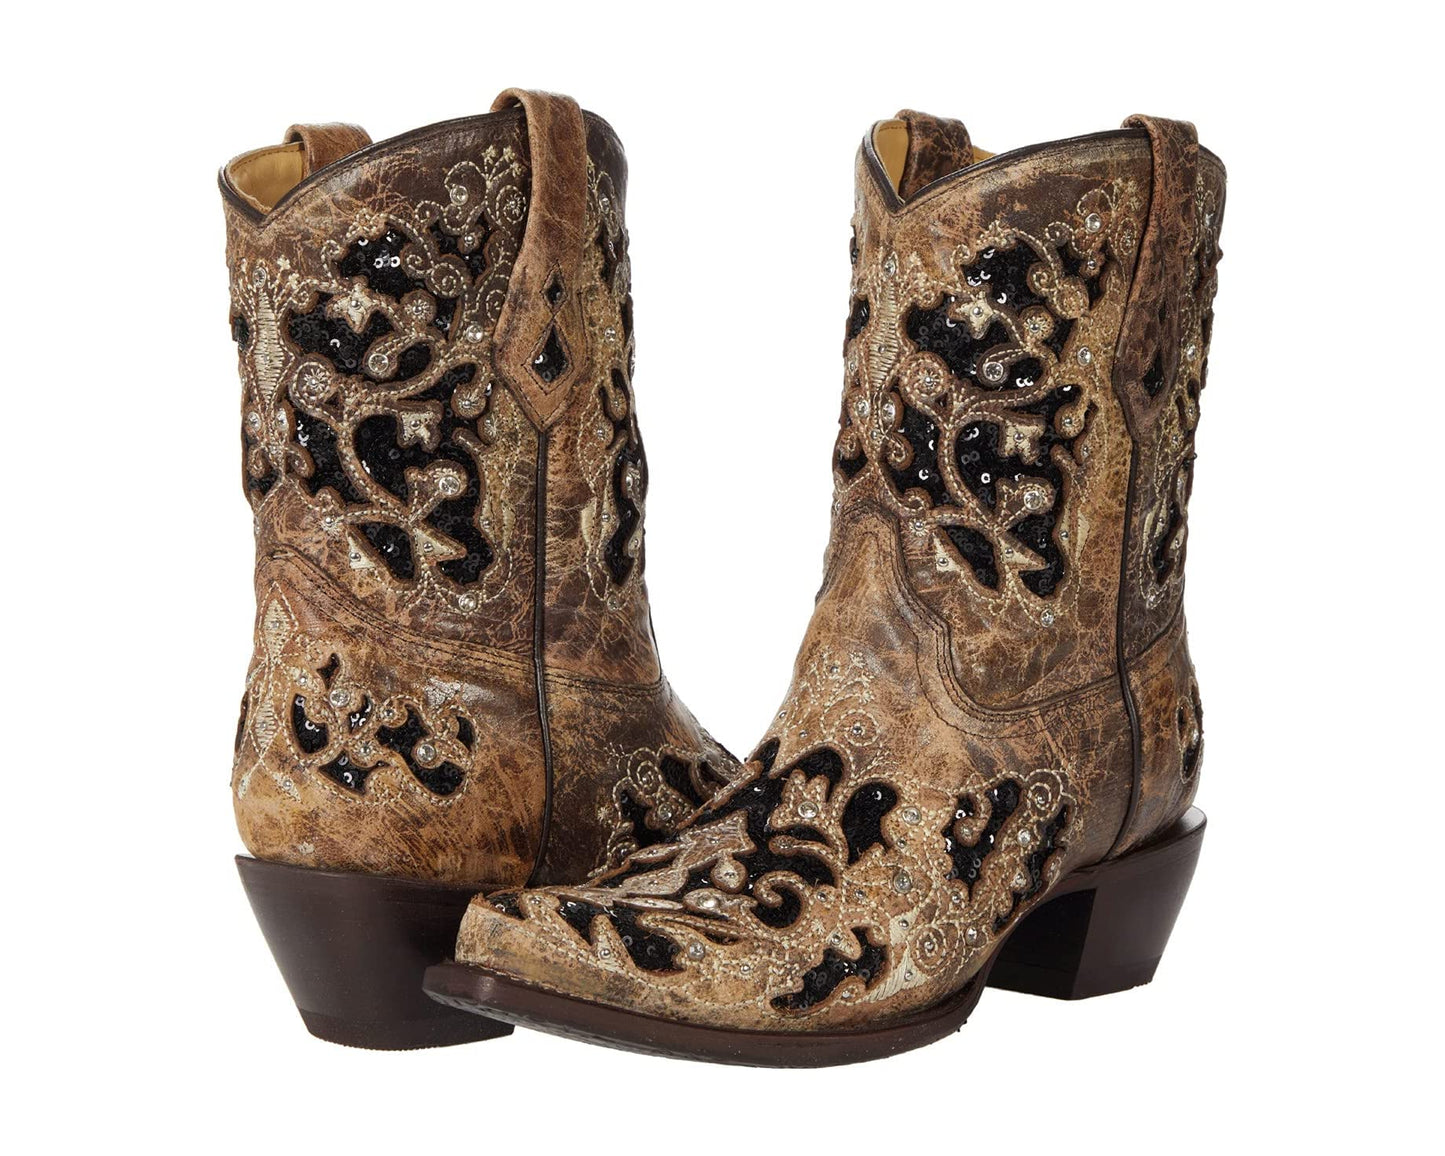 CORRAL WOMEN'S BROWN INLAY WESTERN BOOTIES - SNIP TOE A4190